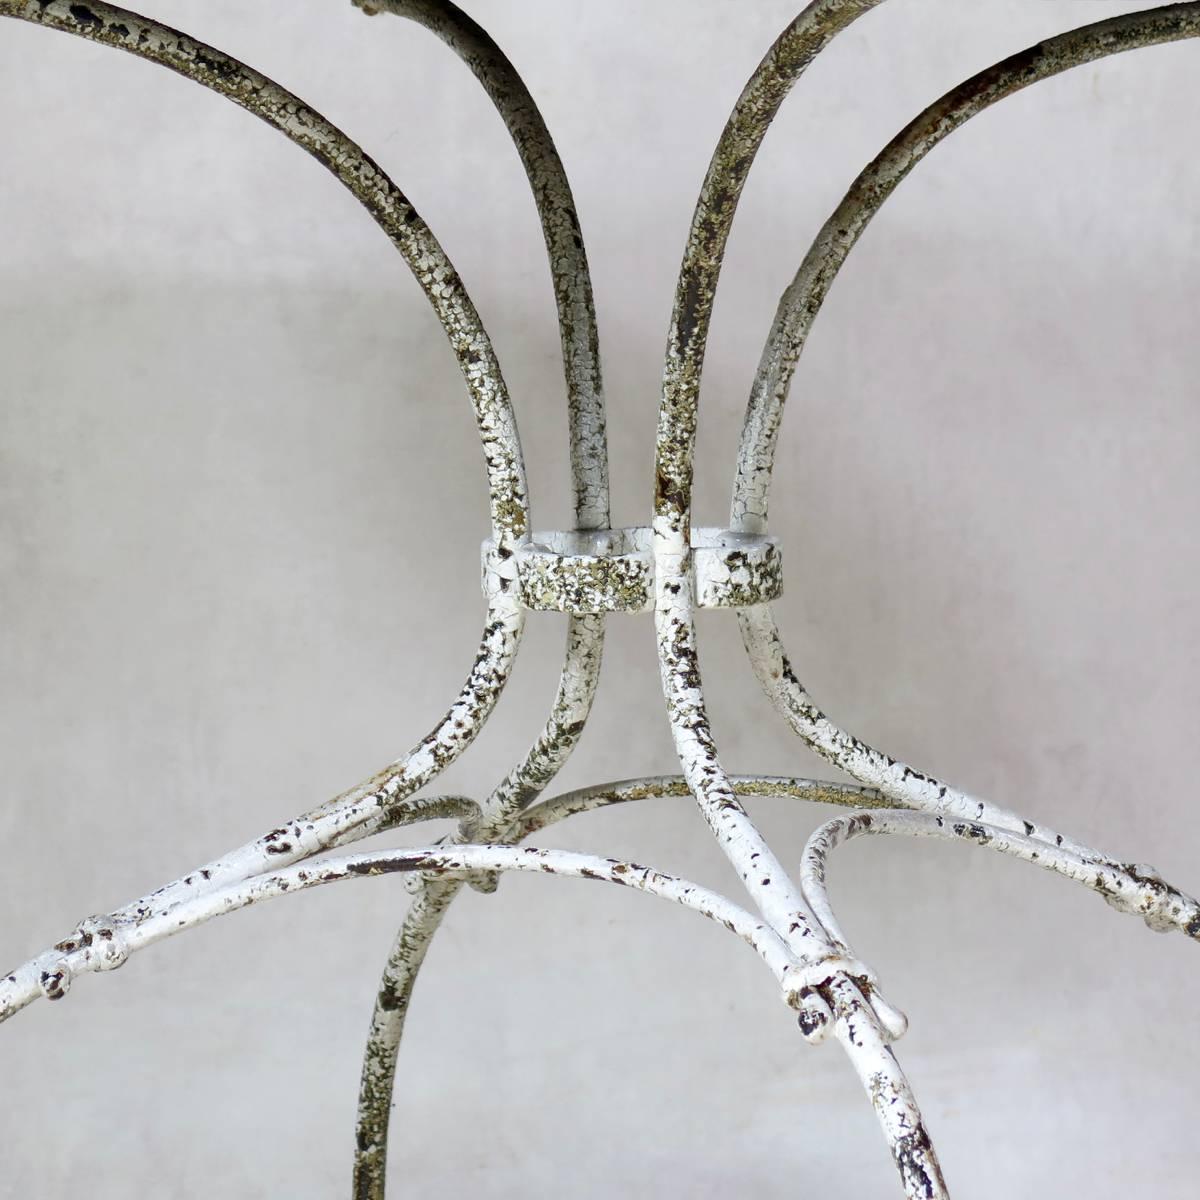 Painted Round Wrought Iron and Marble Garden Table, France, Early 1900s